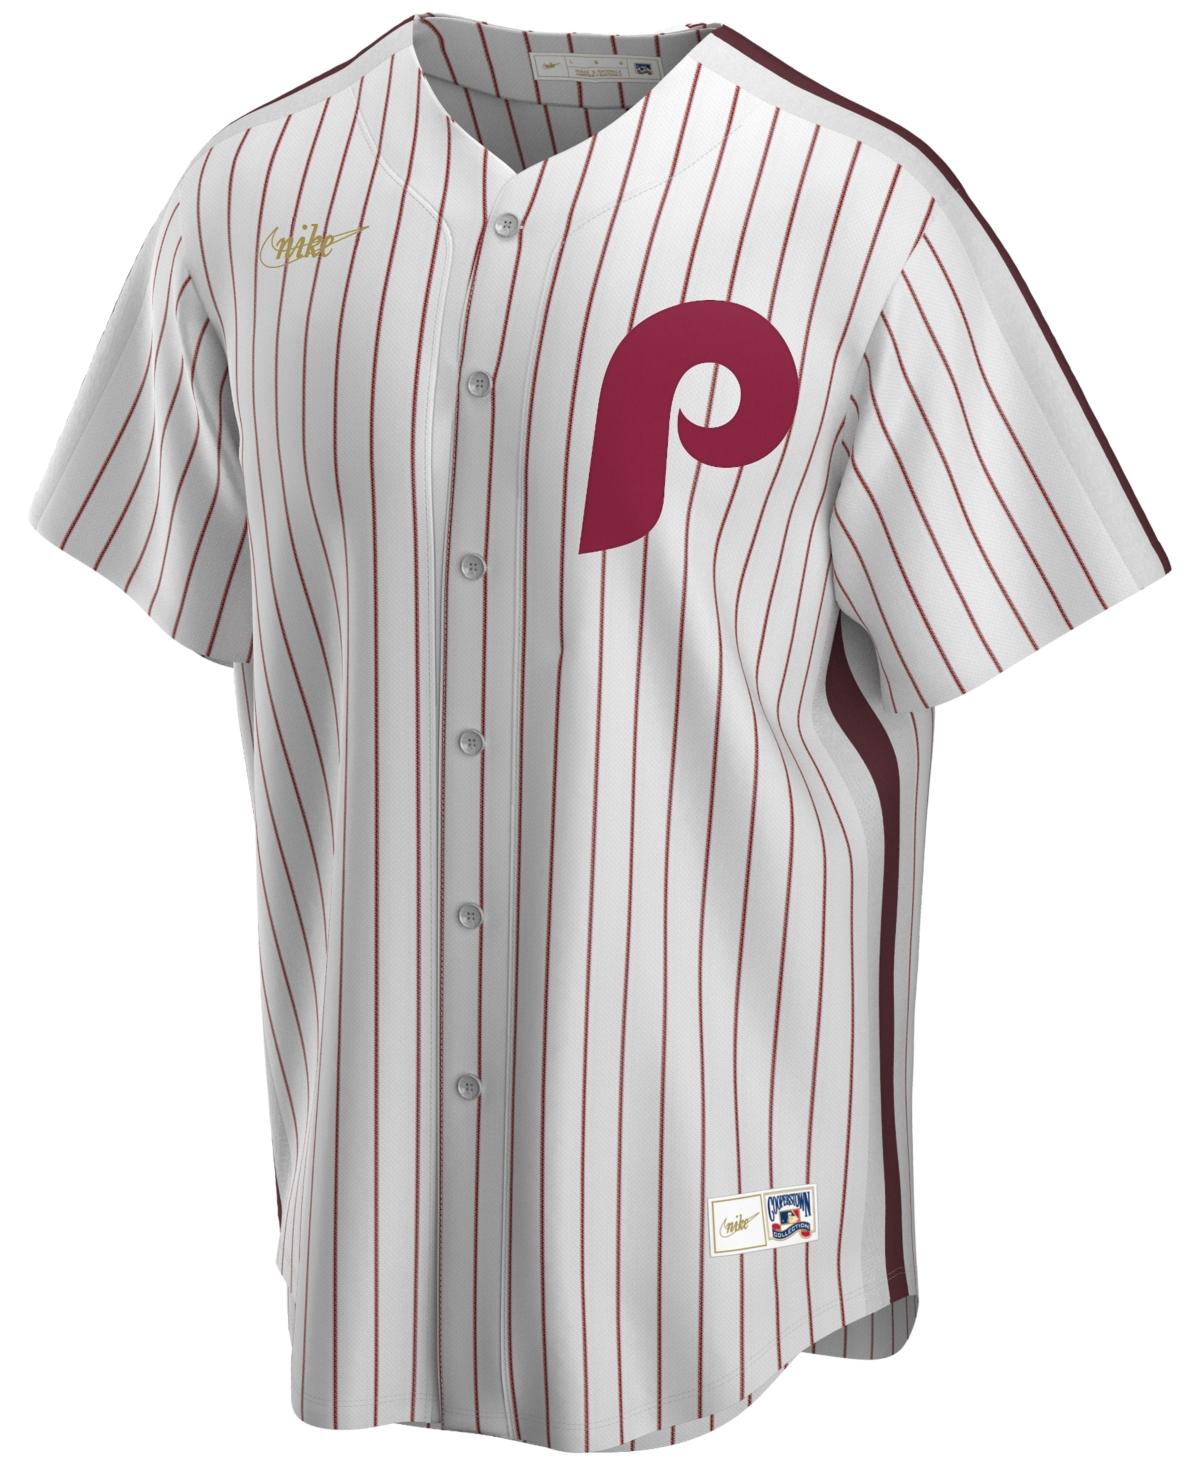 Men's Nike Mike Schmidt White Philadelphia Phillies Home Cooperstown  Collection Player Jersey 